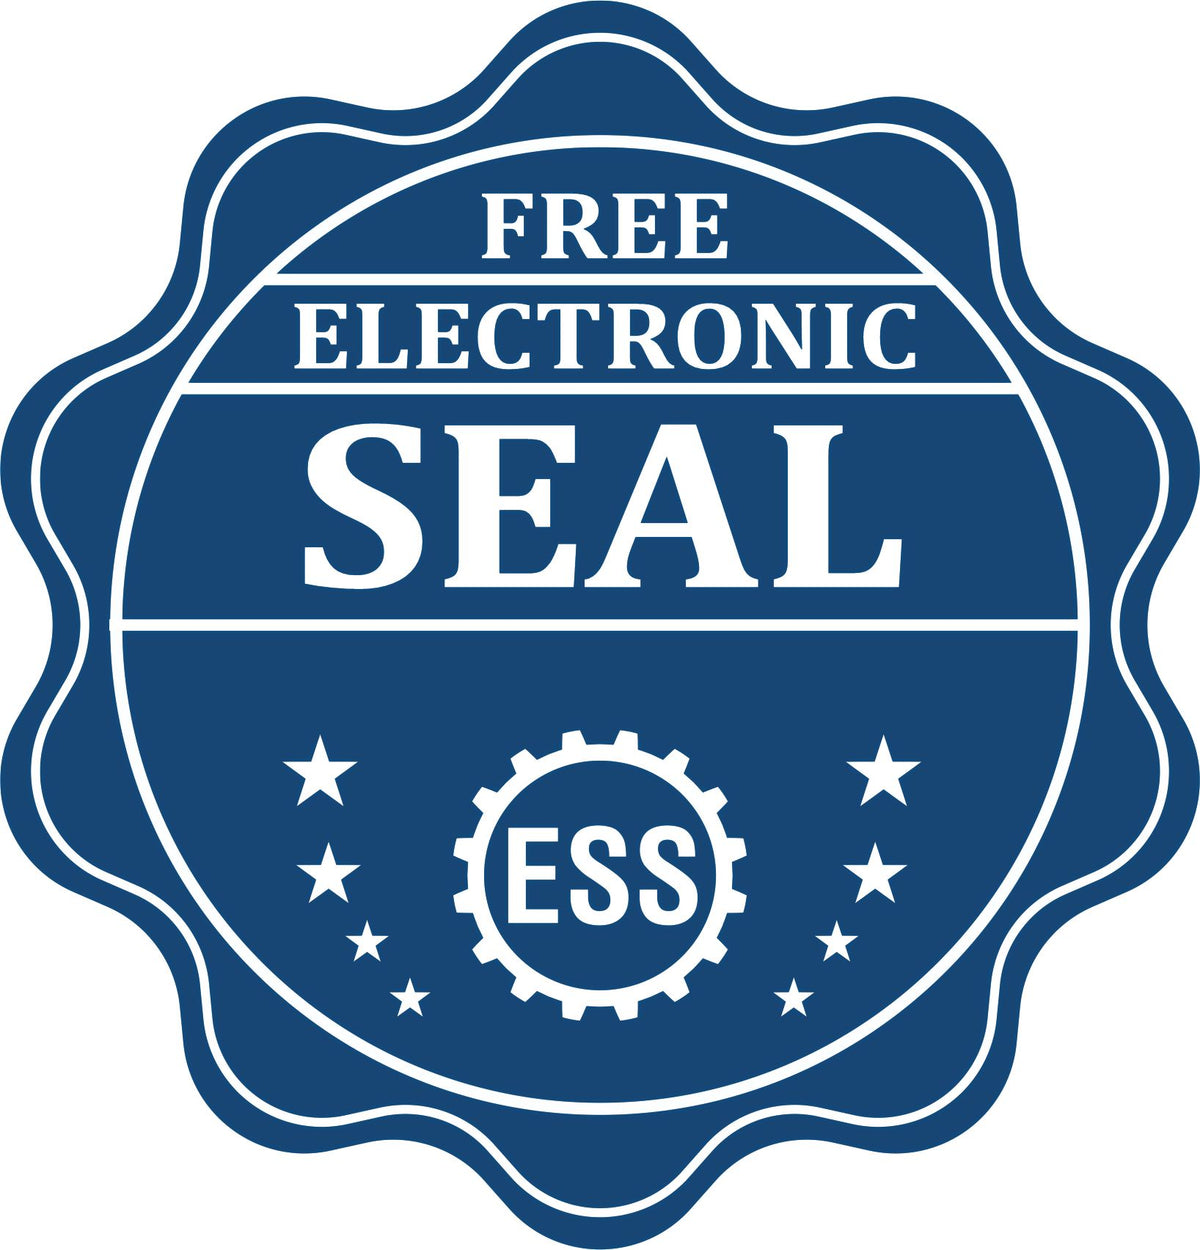 A badge showing a free electronic seal for the West Virginia Geologist Desk Seal with stars and the ESS gear on the emblem.